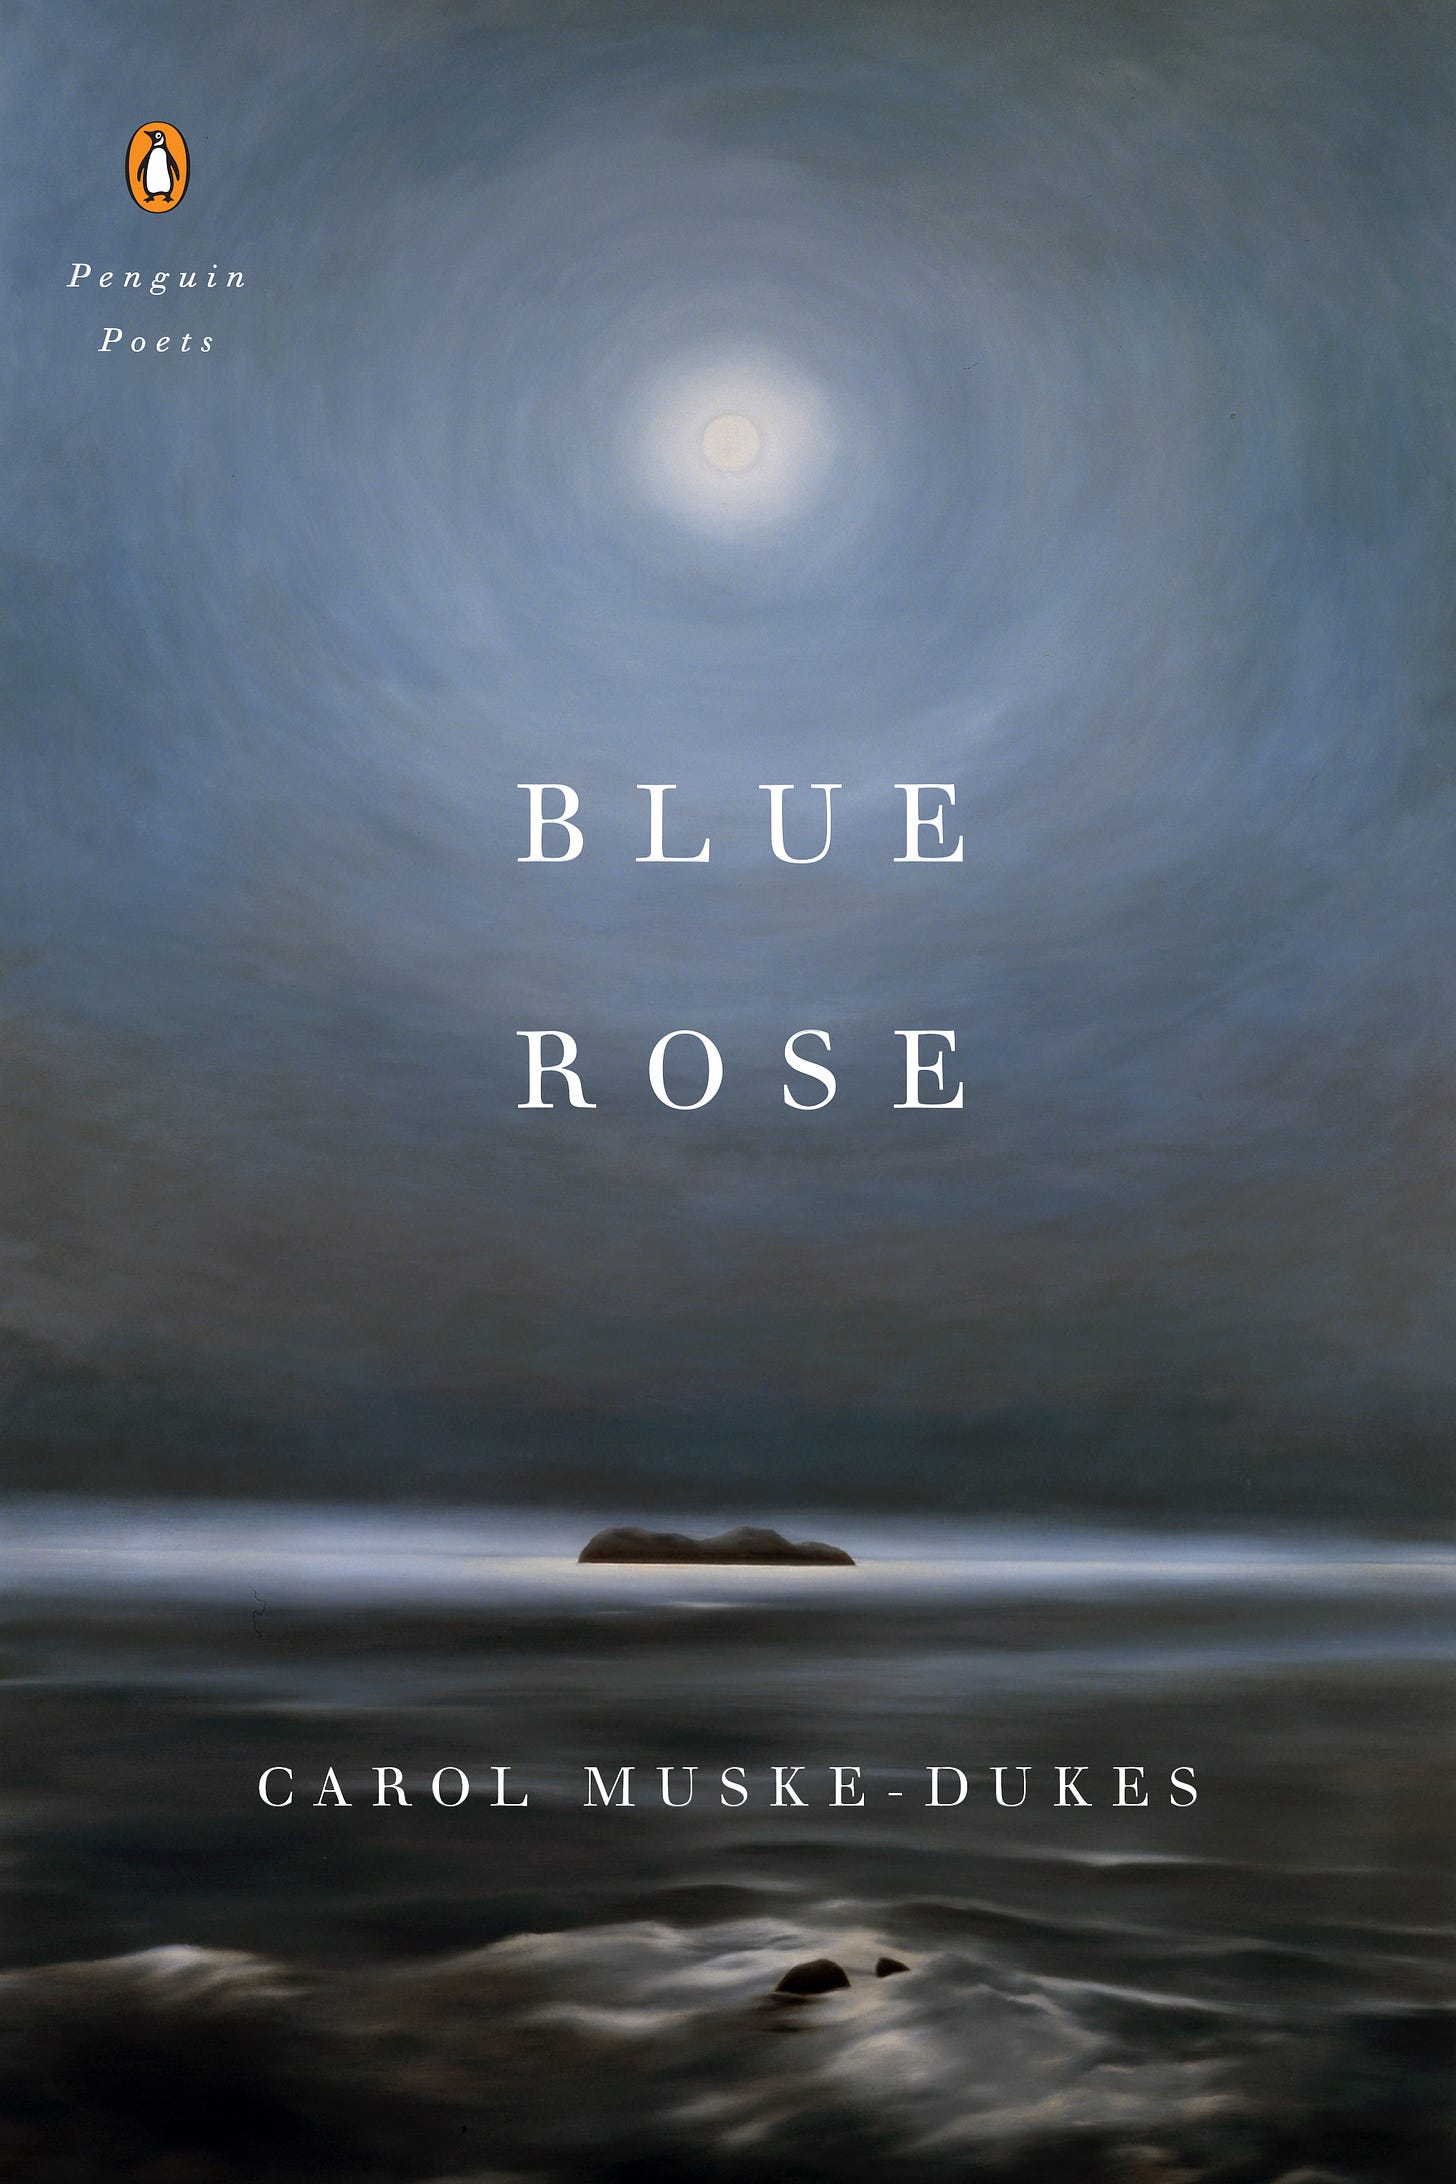 This is the book cover of Blue Rose by Carol Muske-Dukes